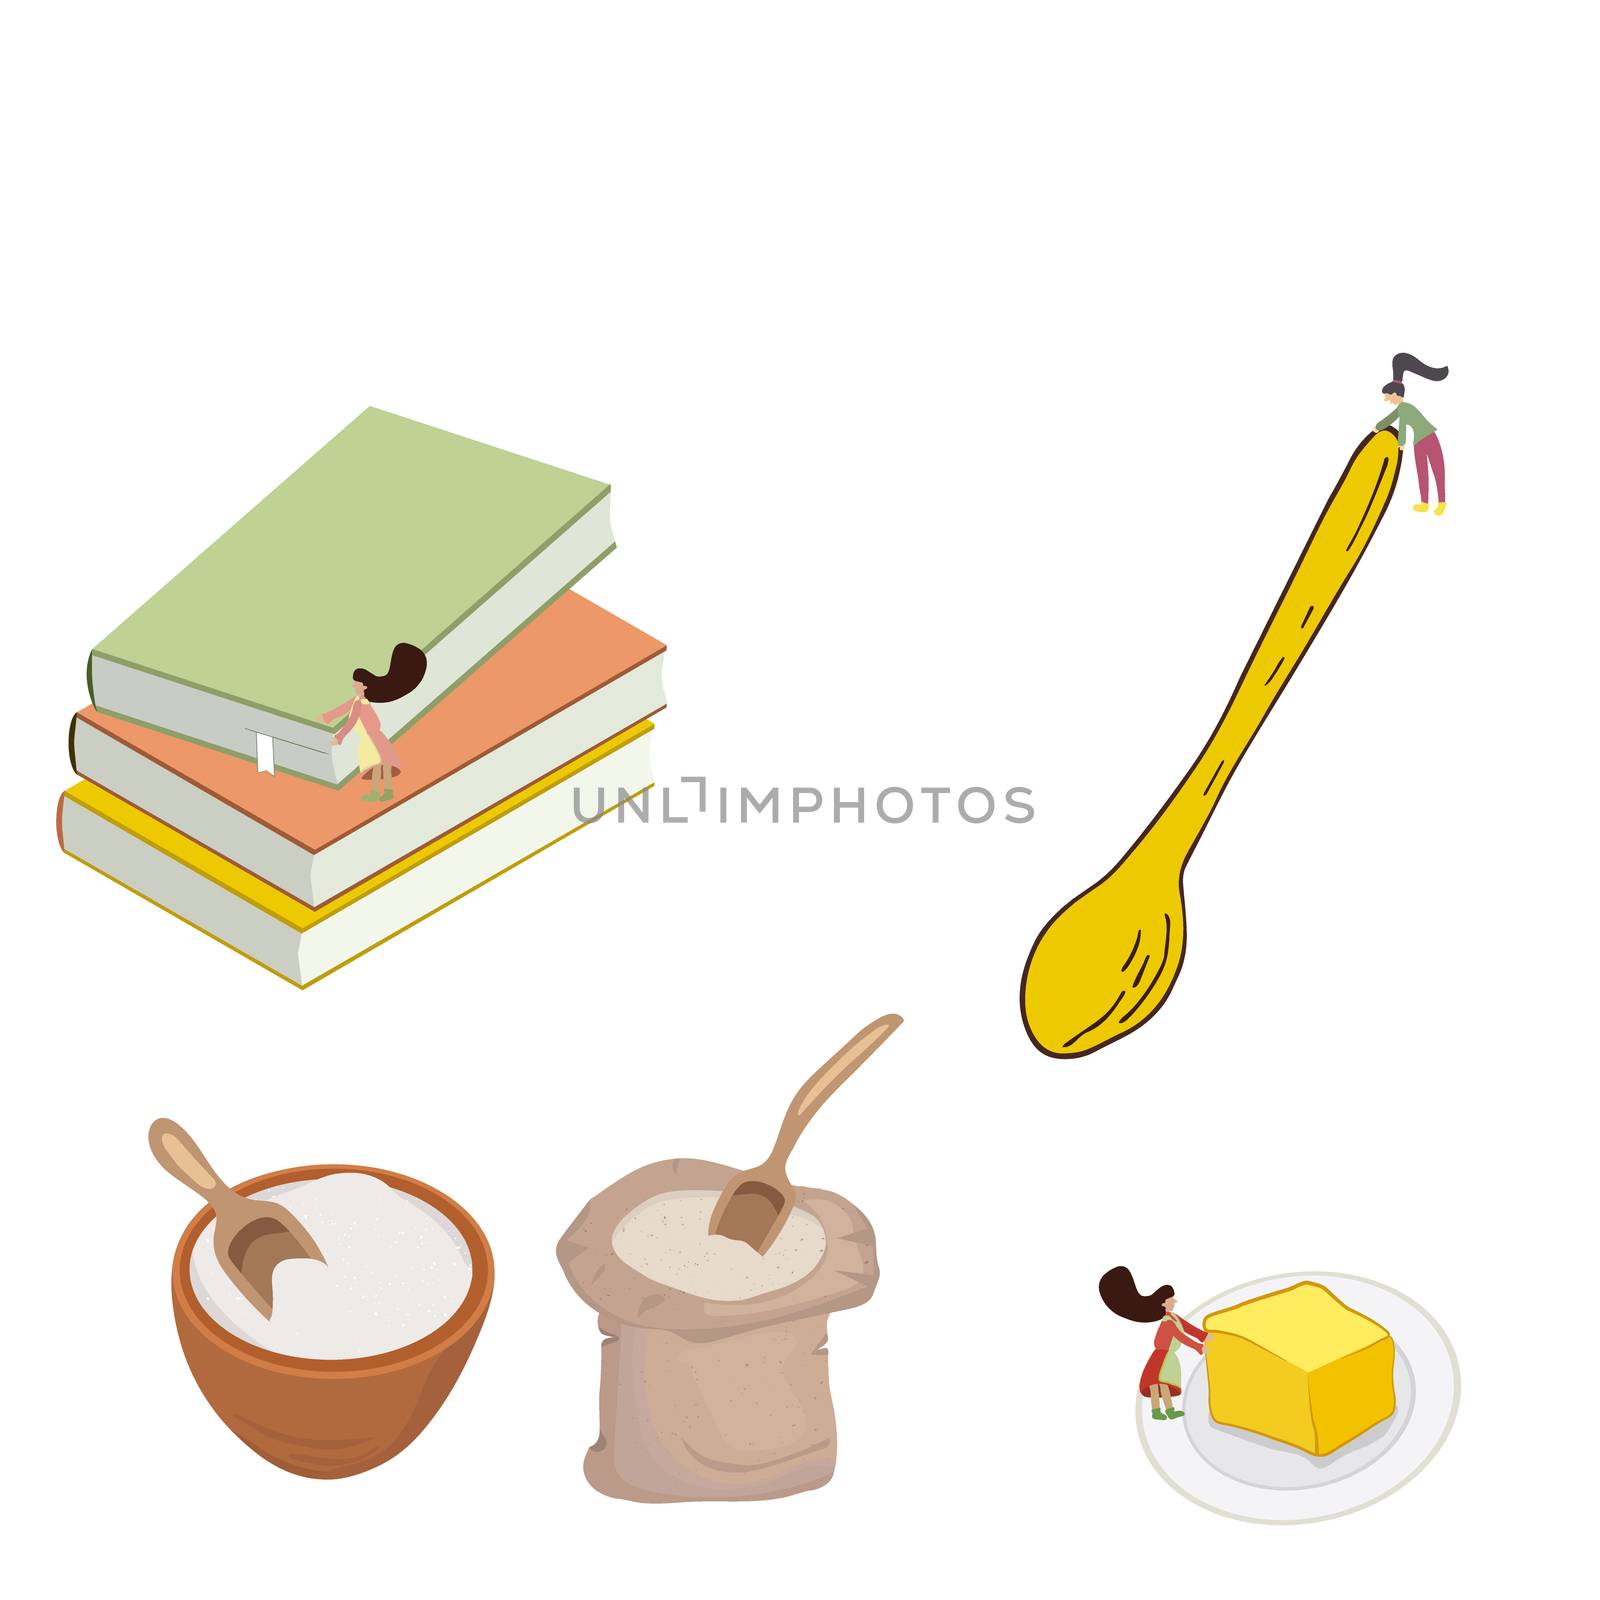 Little people preparing food and recipes.Cooking process illustration. 